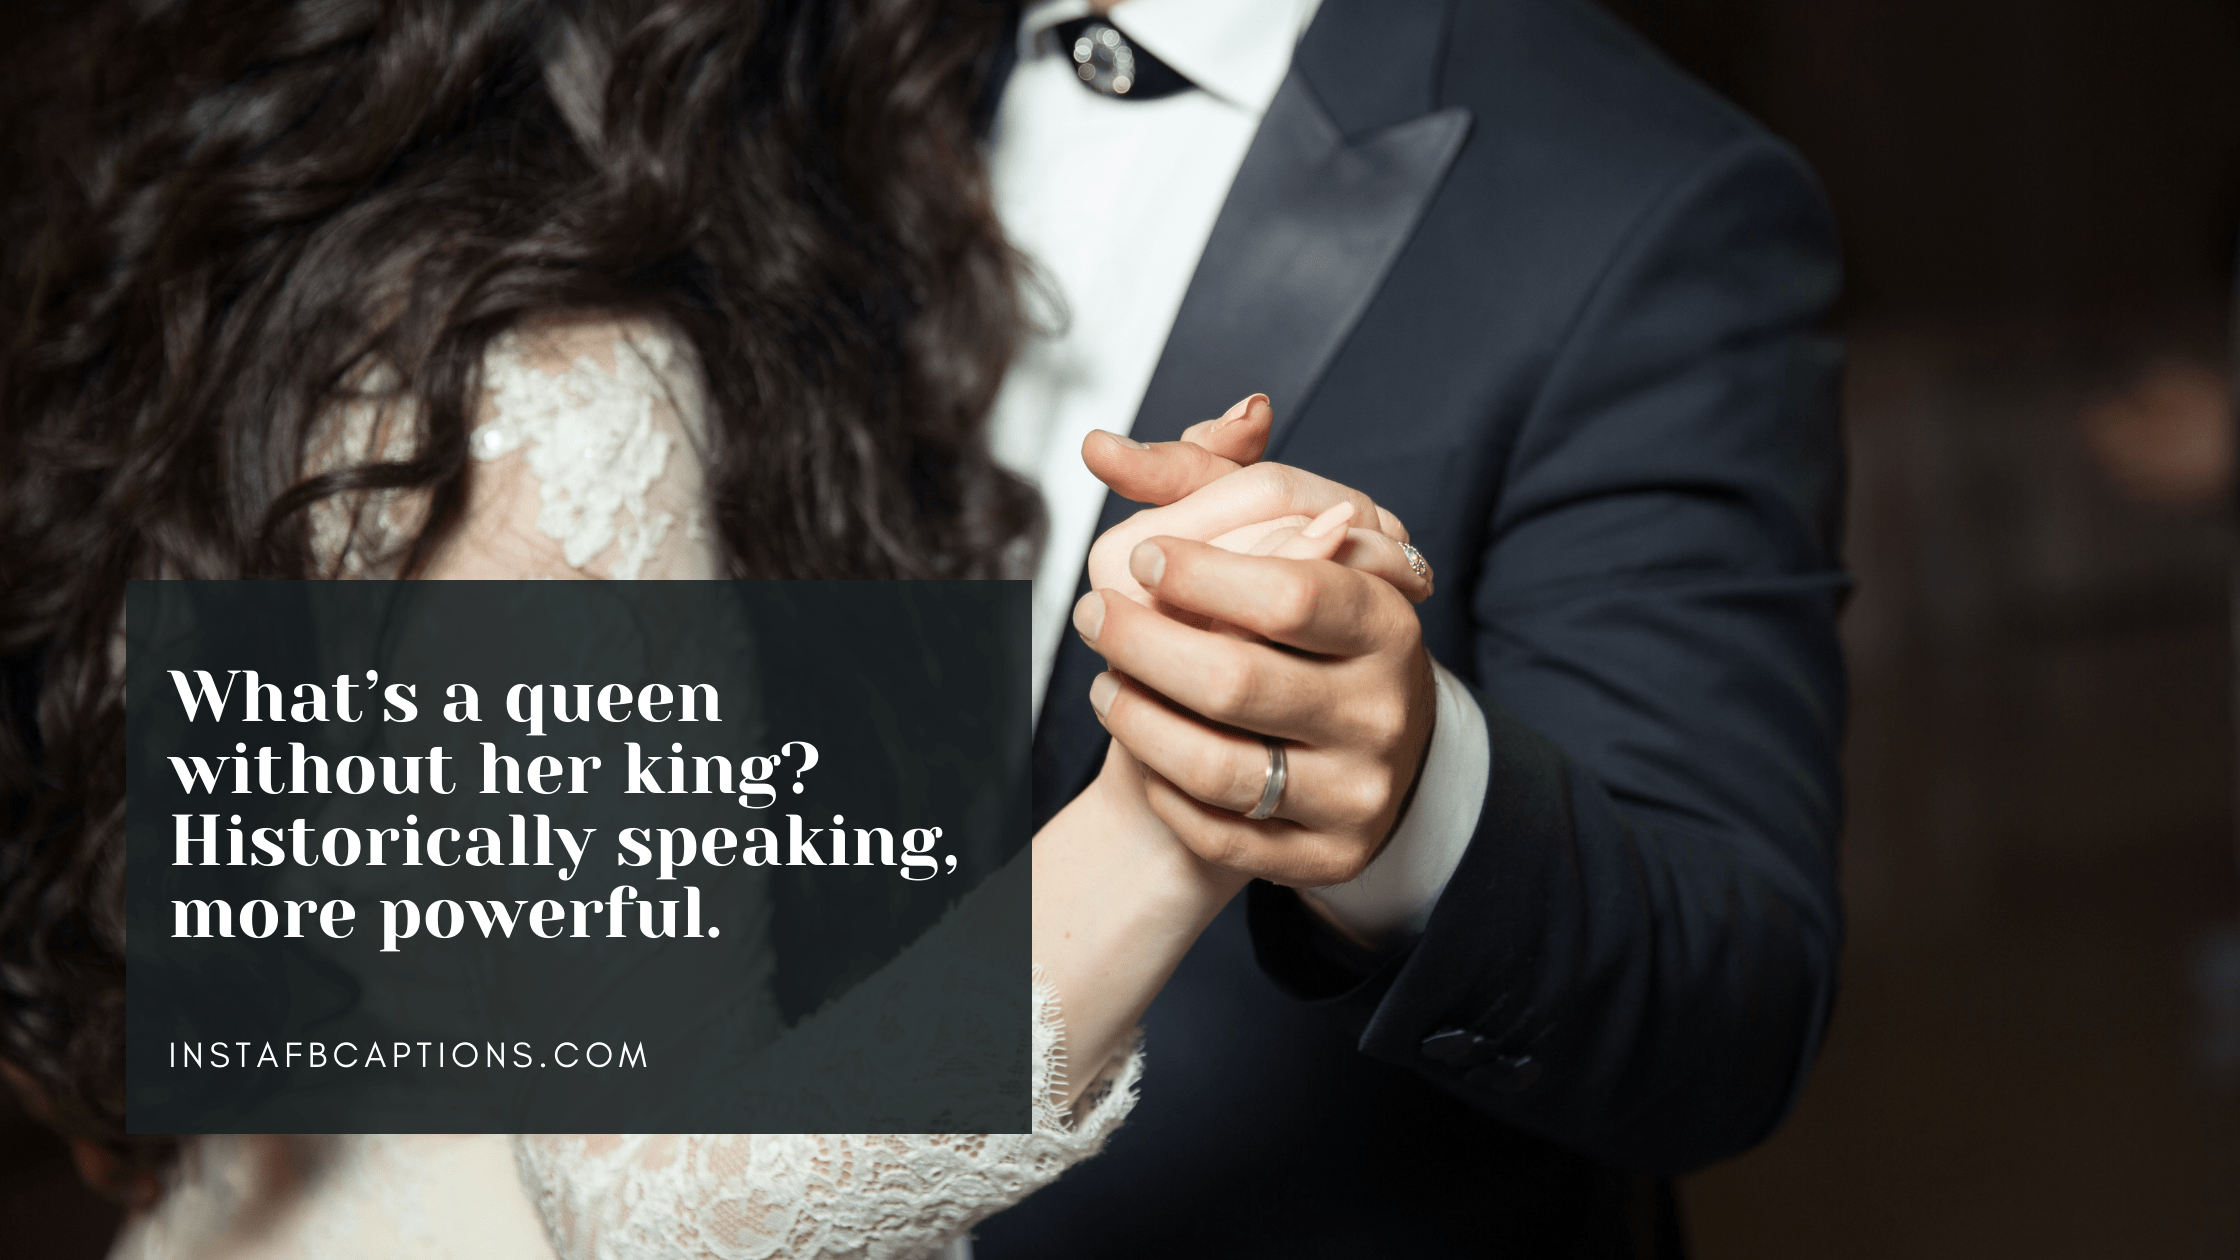 What's a queen without her king? Historically speaking, more powerful. pre-wedding captions for instagram - Random Captions for the Photoshoot - 95+ Pre-Wedding Photoshoot Instagram Captions 2022